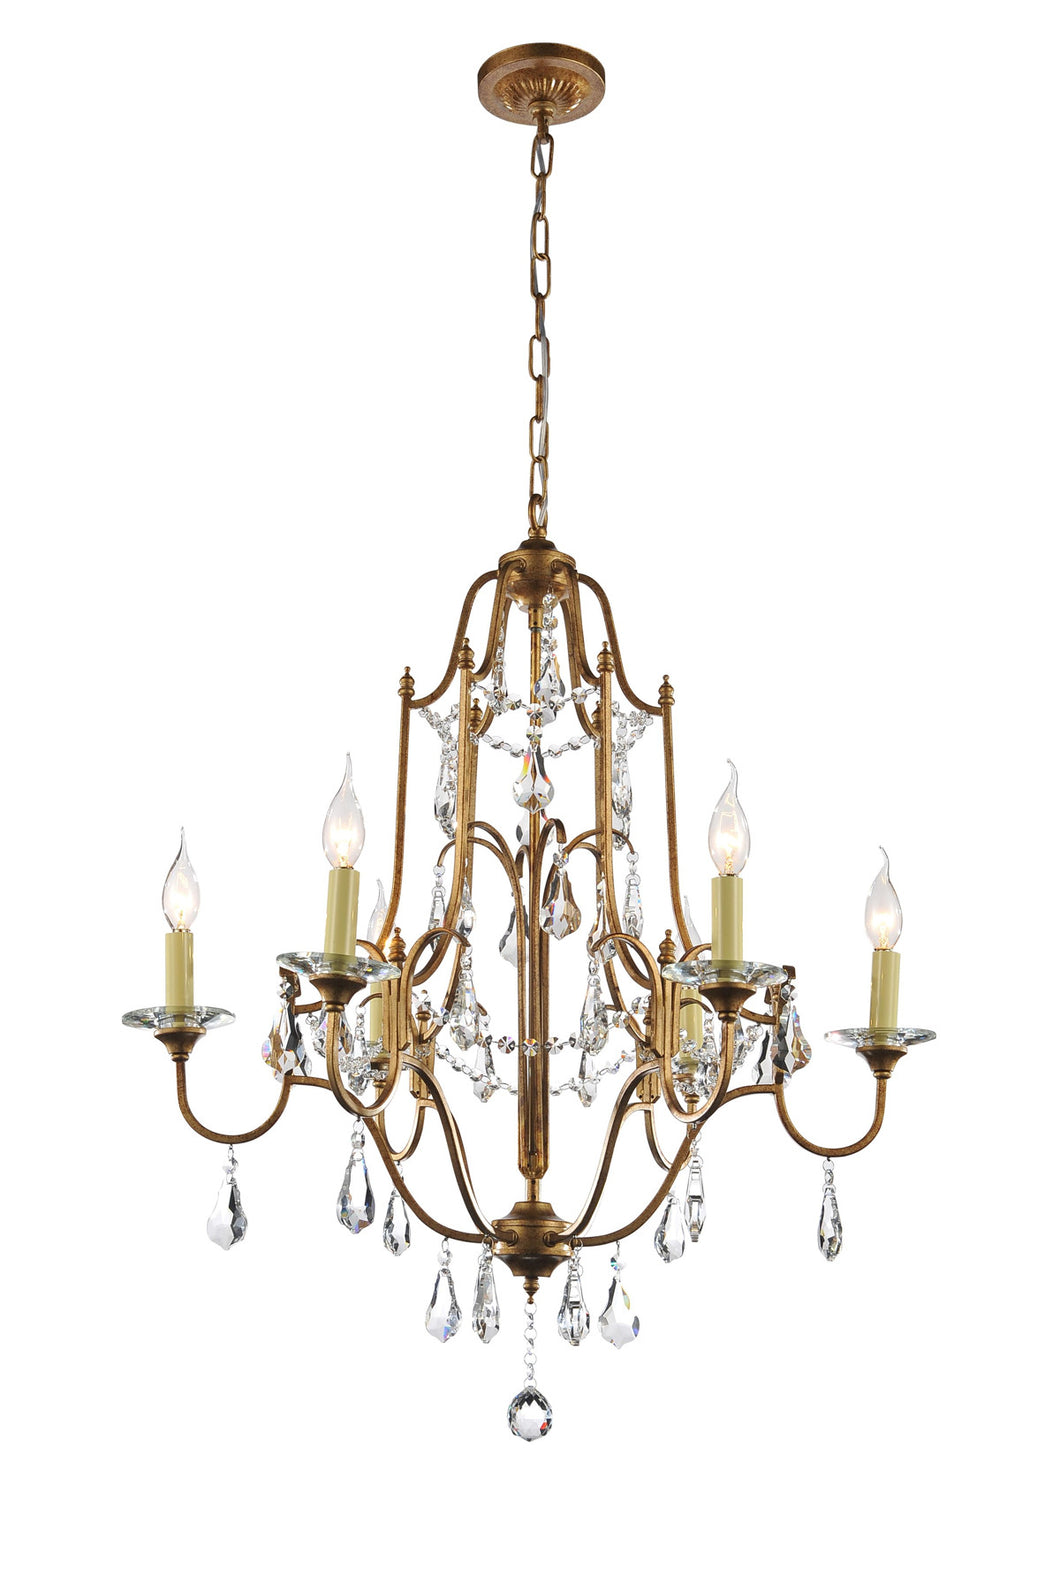 6 Light Up Chandelier with Oxidized Bronze finish